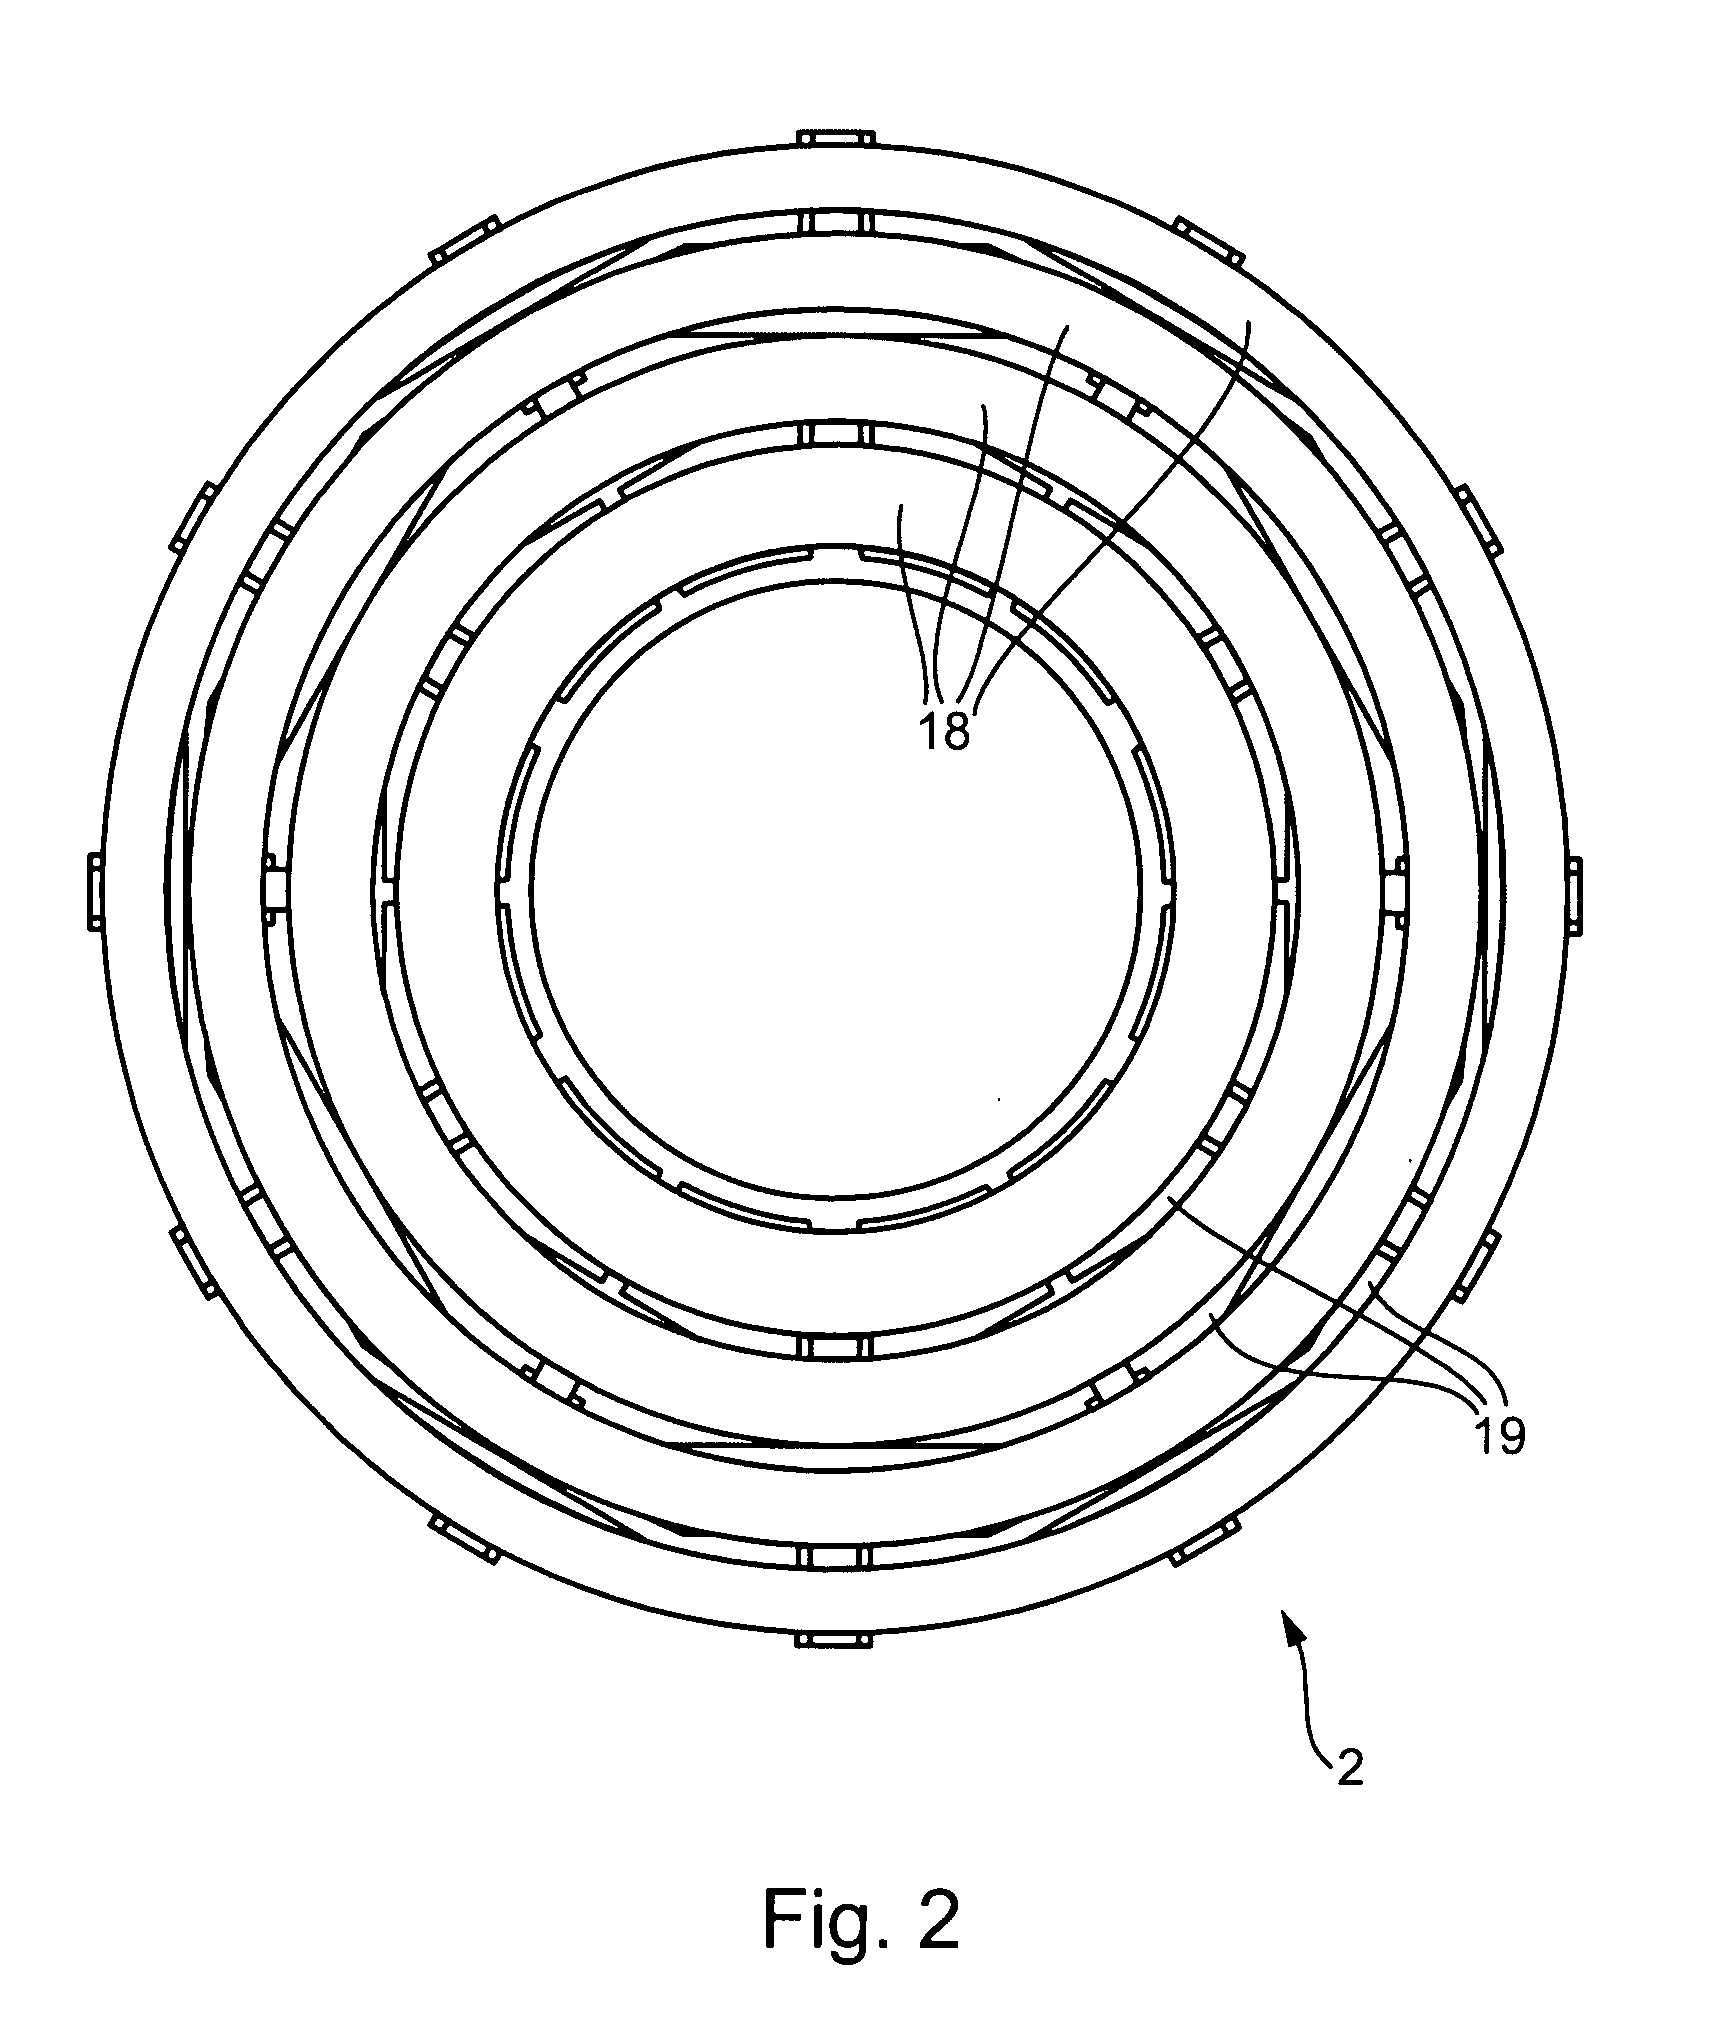 Magnetic friction clutch